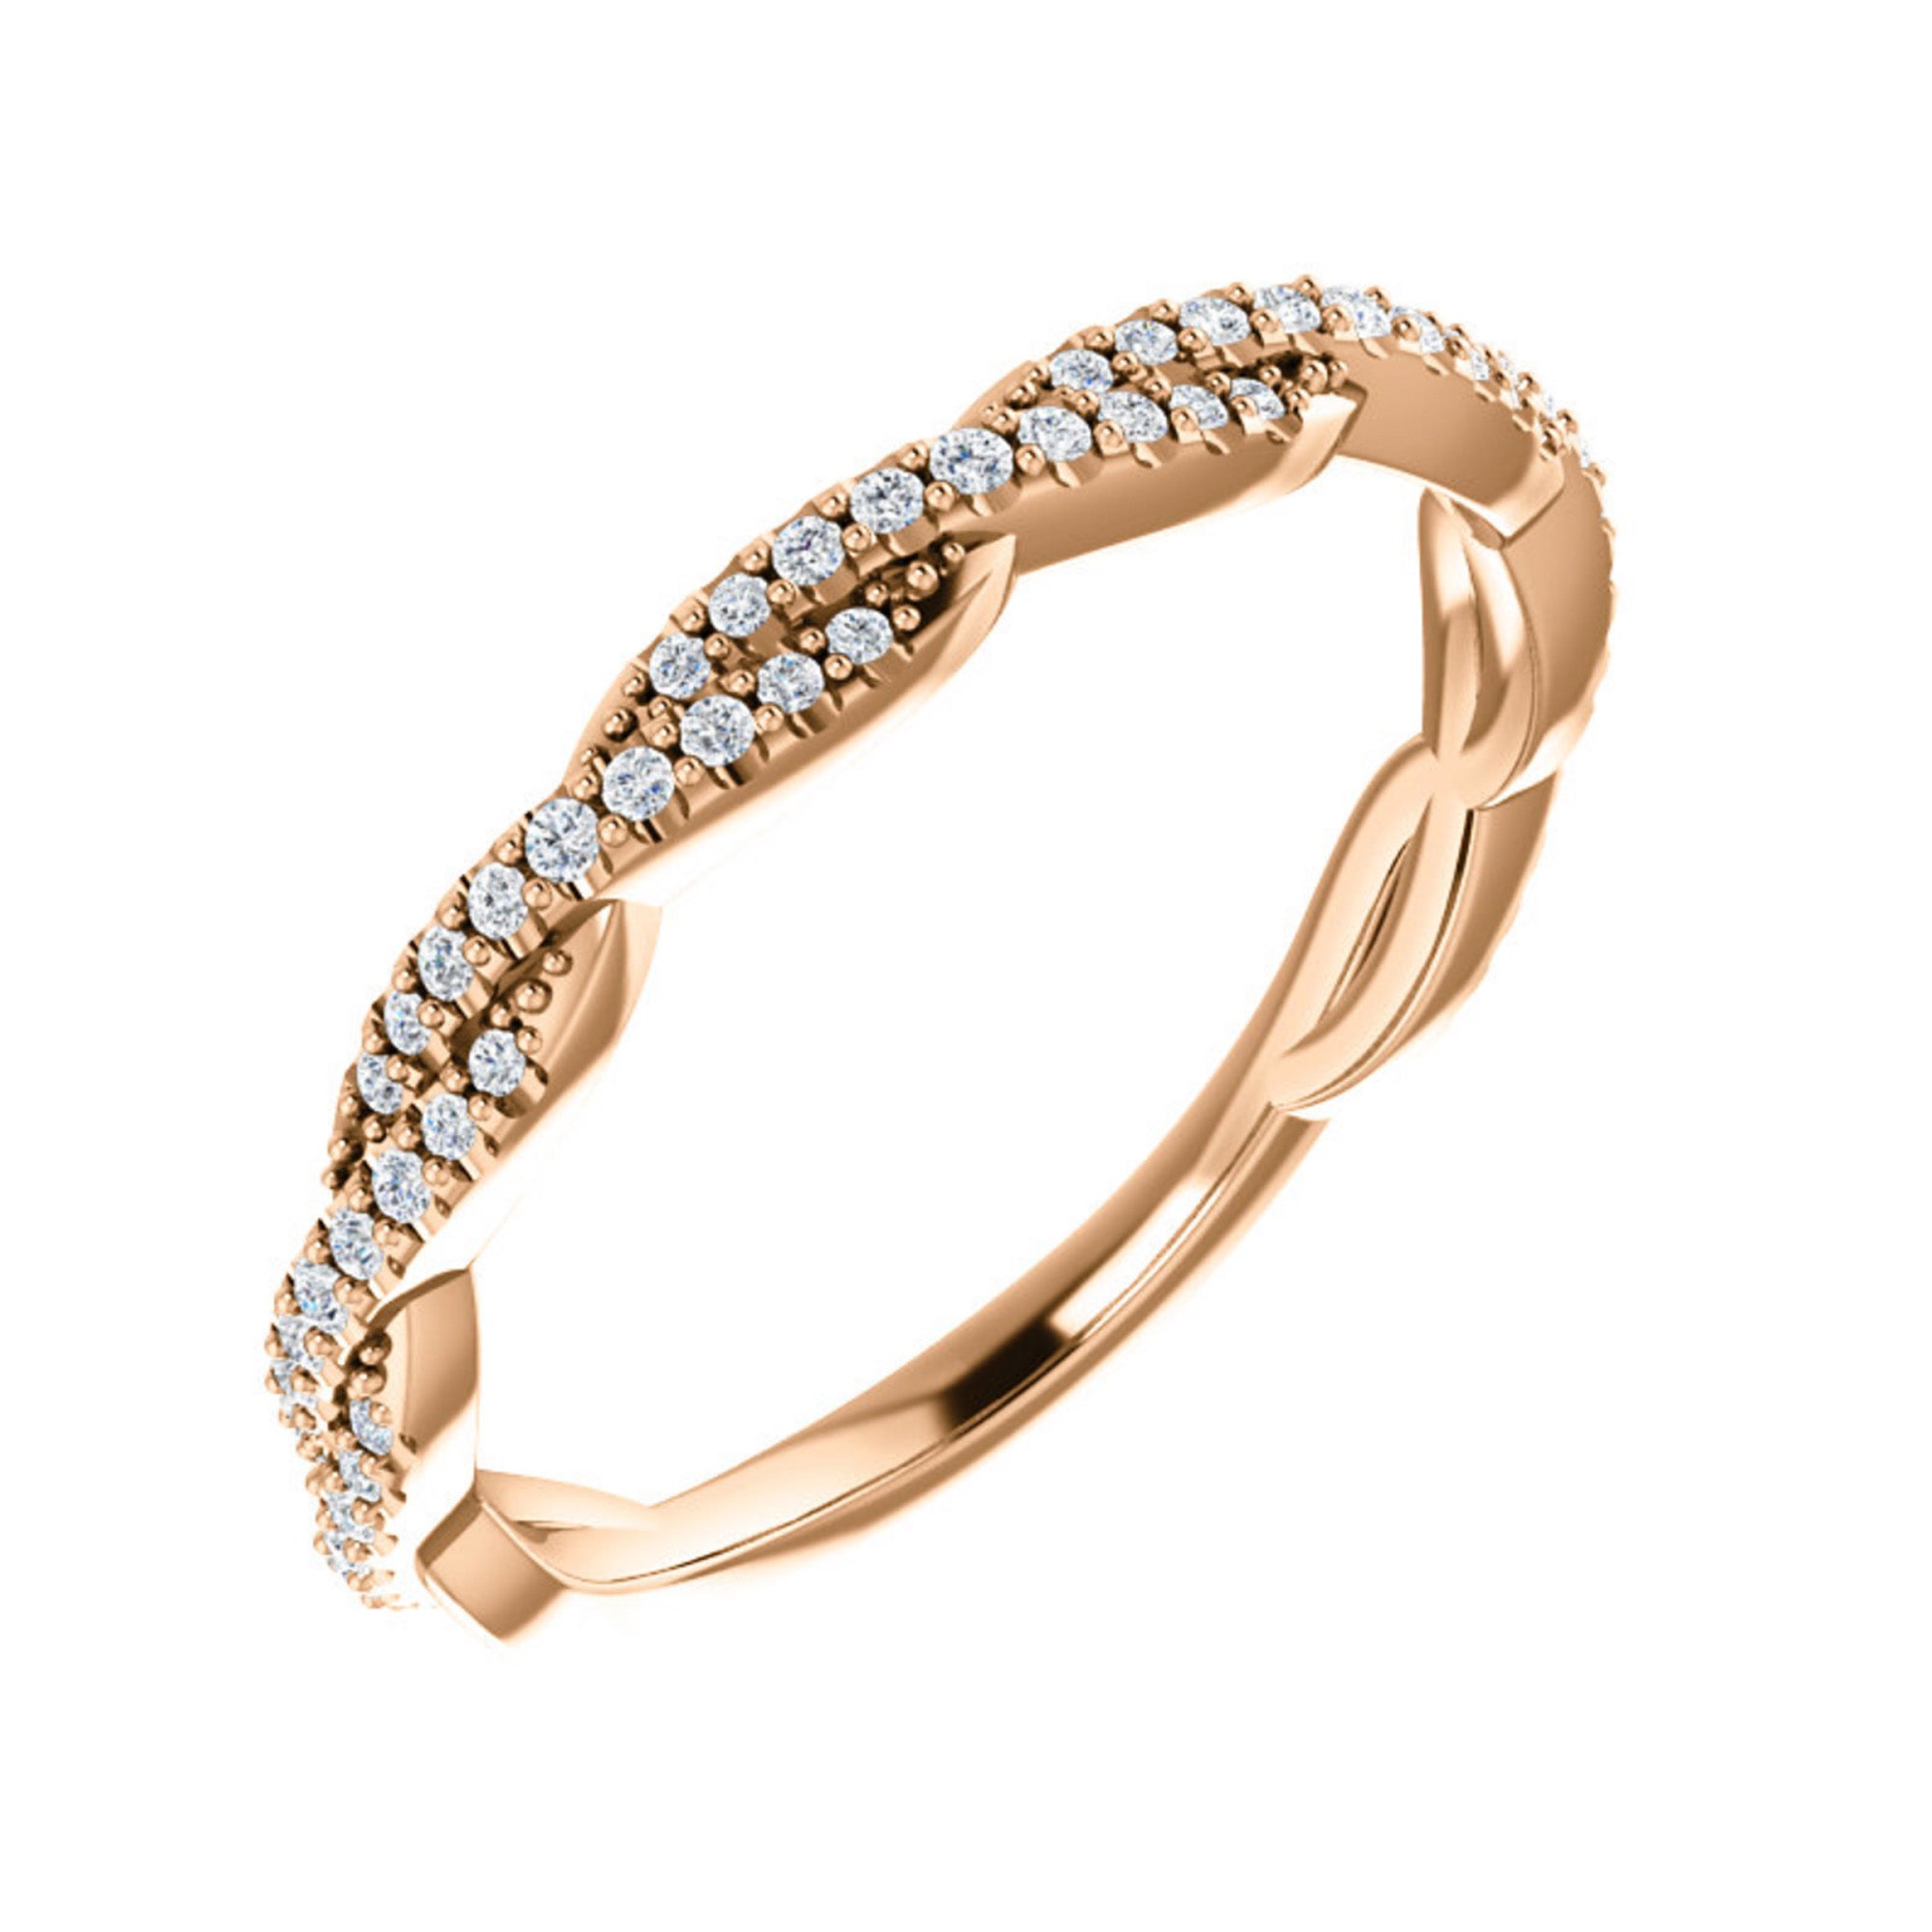 Diamond Twist Anniversary Band in White, Yellow or Rose Gold - Talisman Collection Fine Jewelers